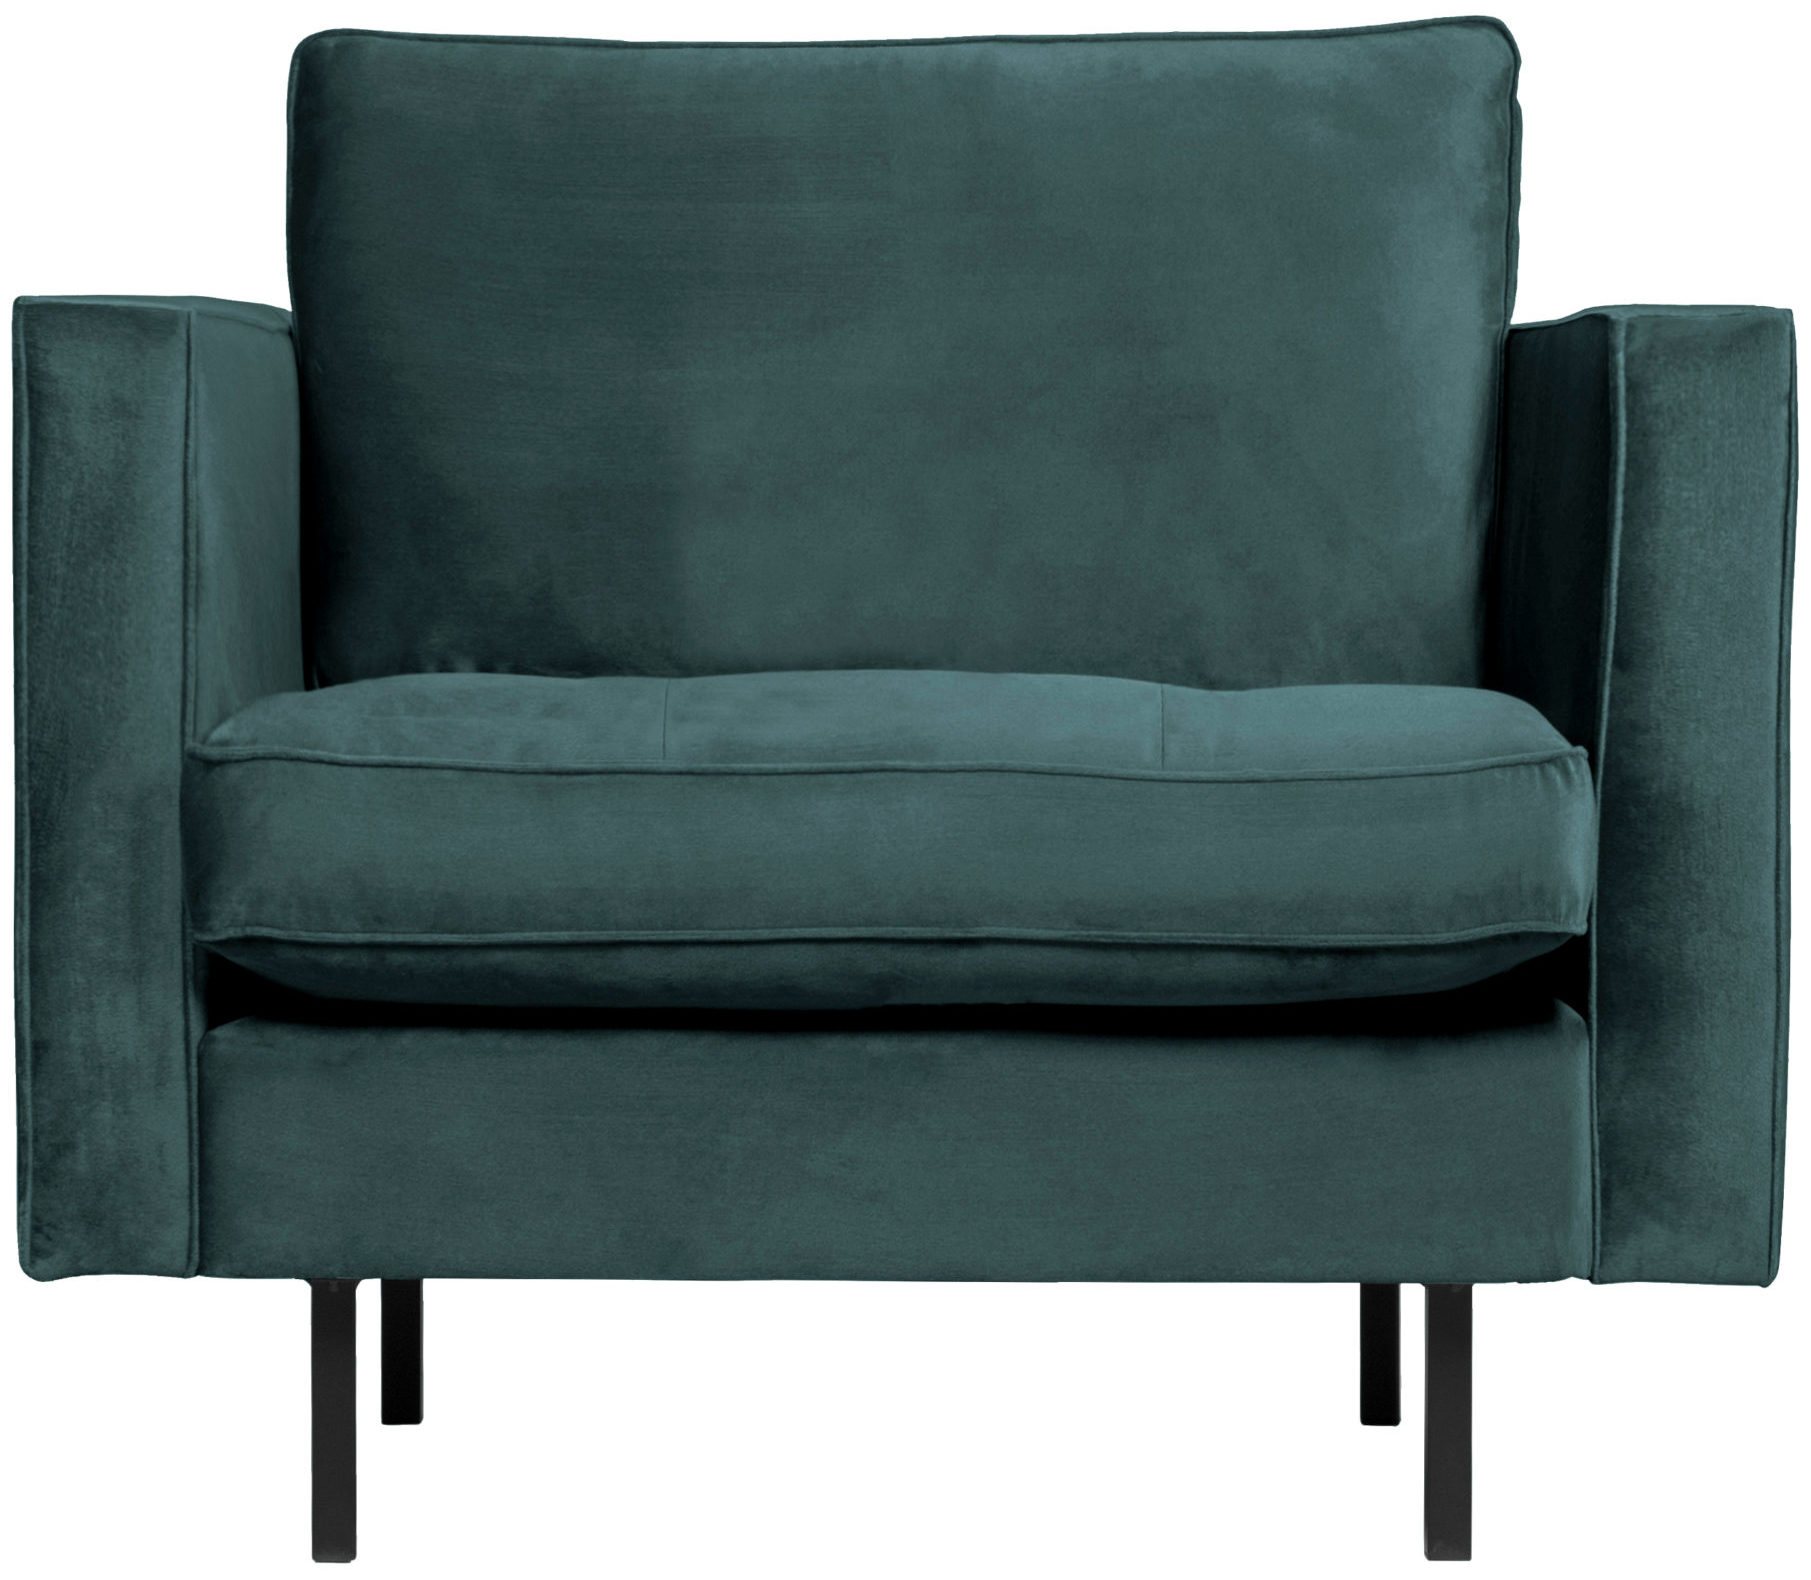 Rodeo Classic Fauteuil Velvet - Teal